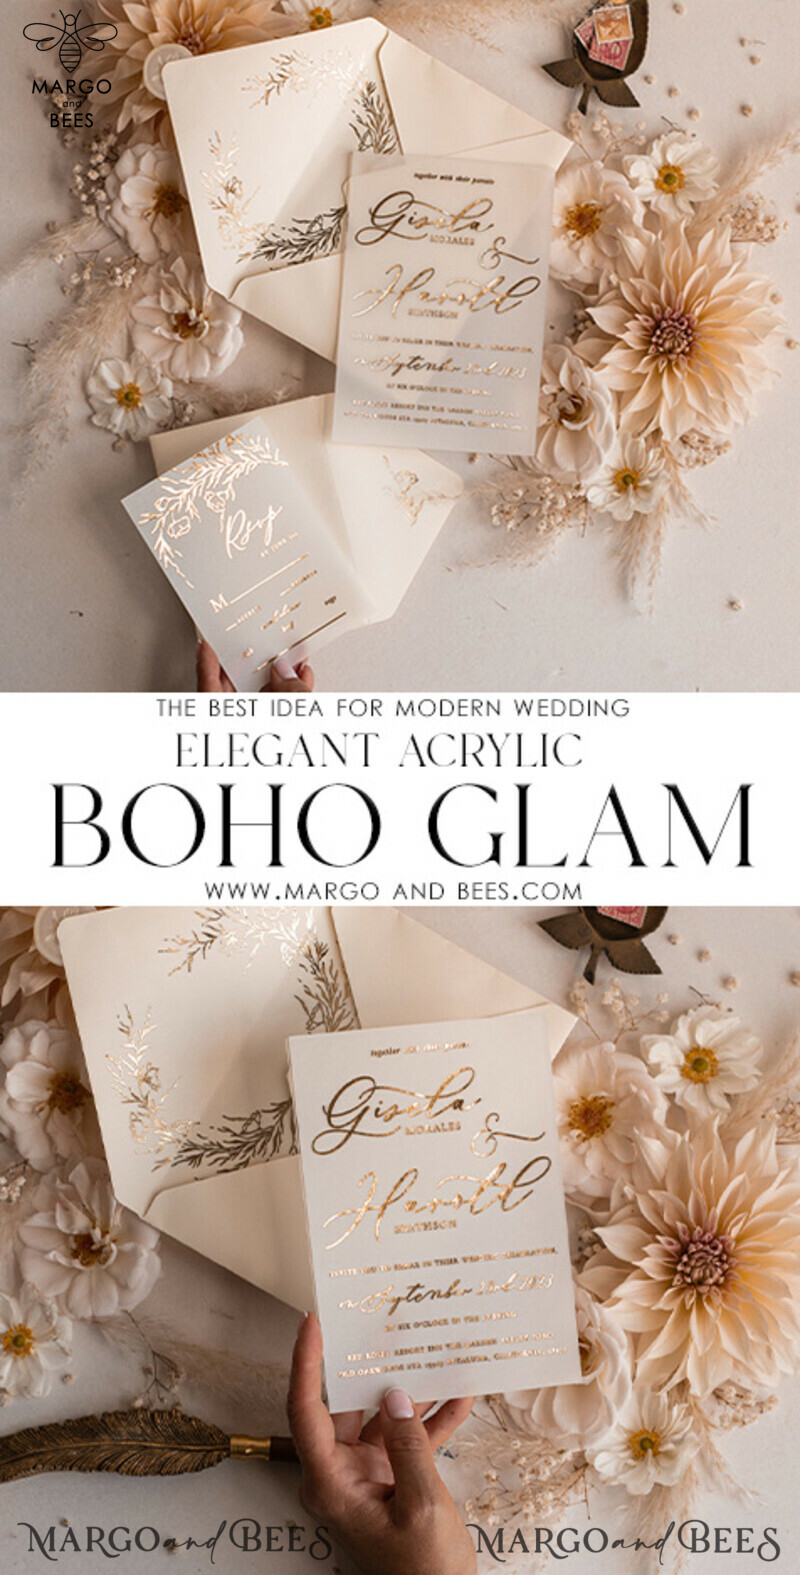 Boho Golden Ivory Wedding Invitations: A Vellum Gold Wedding Card Experience with a Fine Art Touch in our Bespoke Wedding Stationery Suite-3